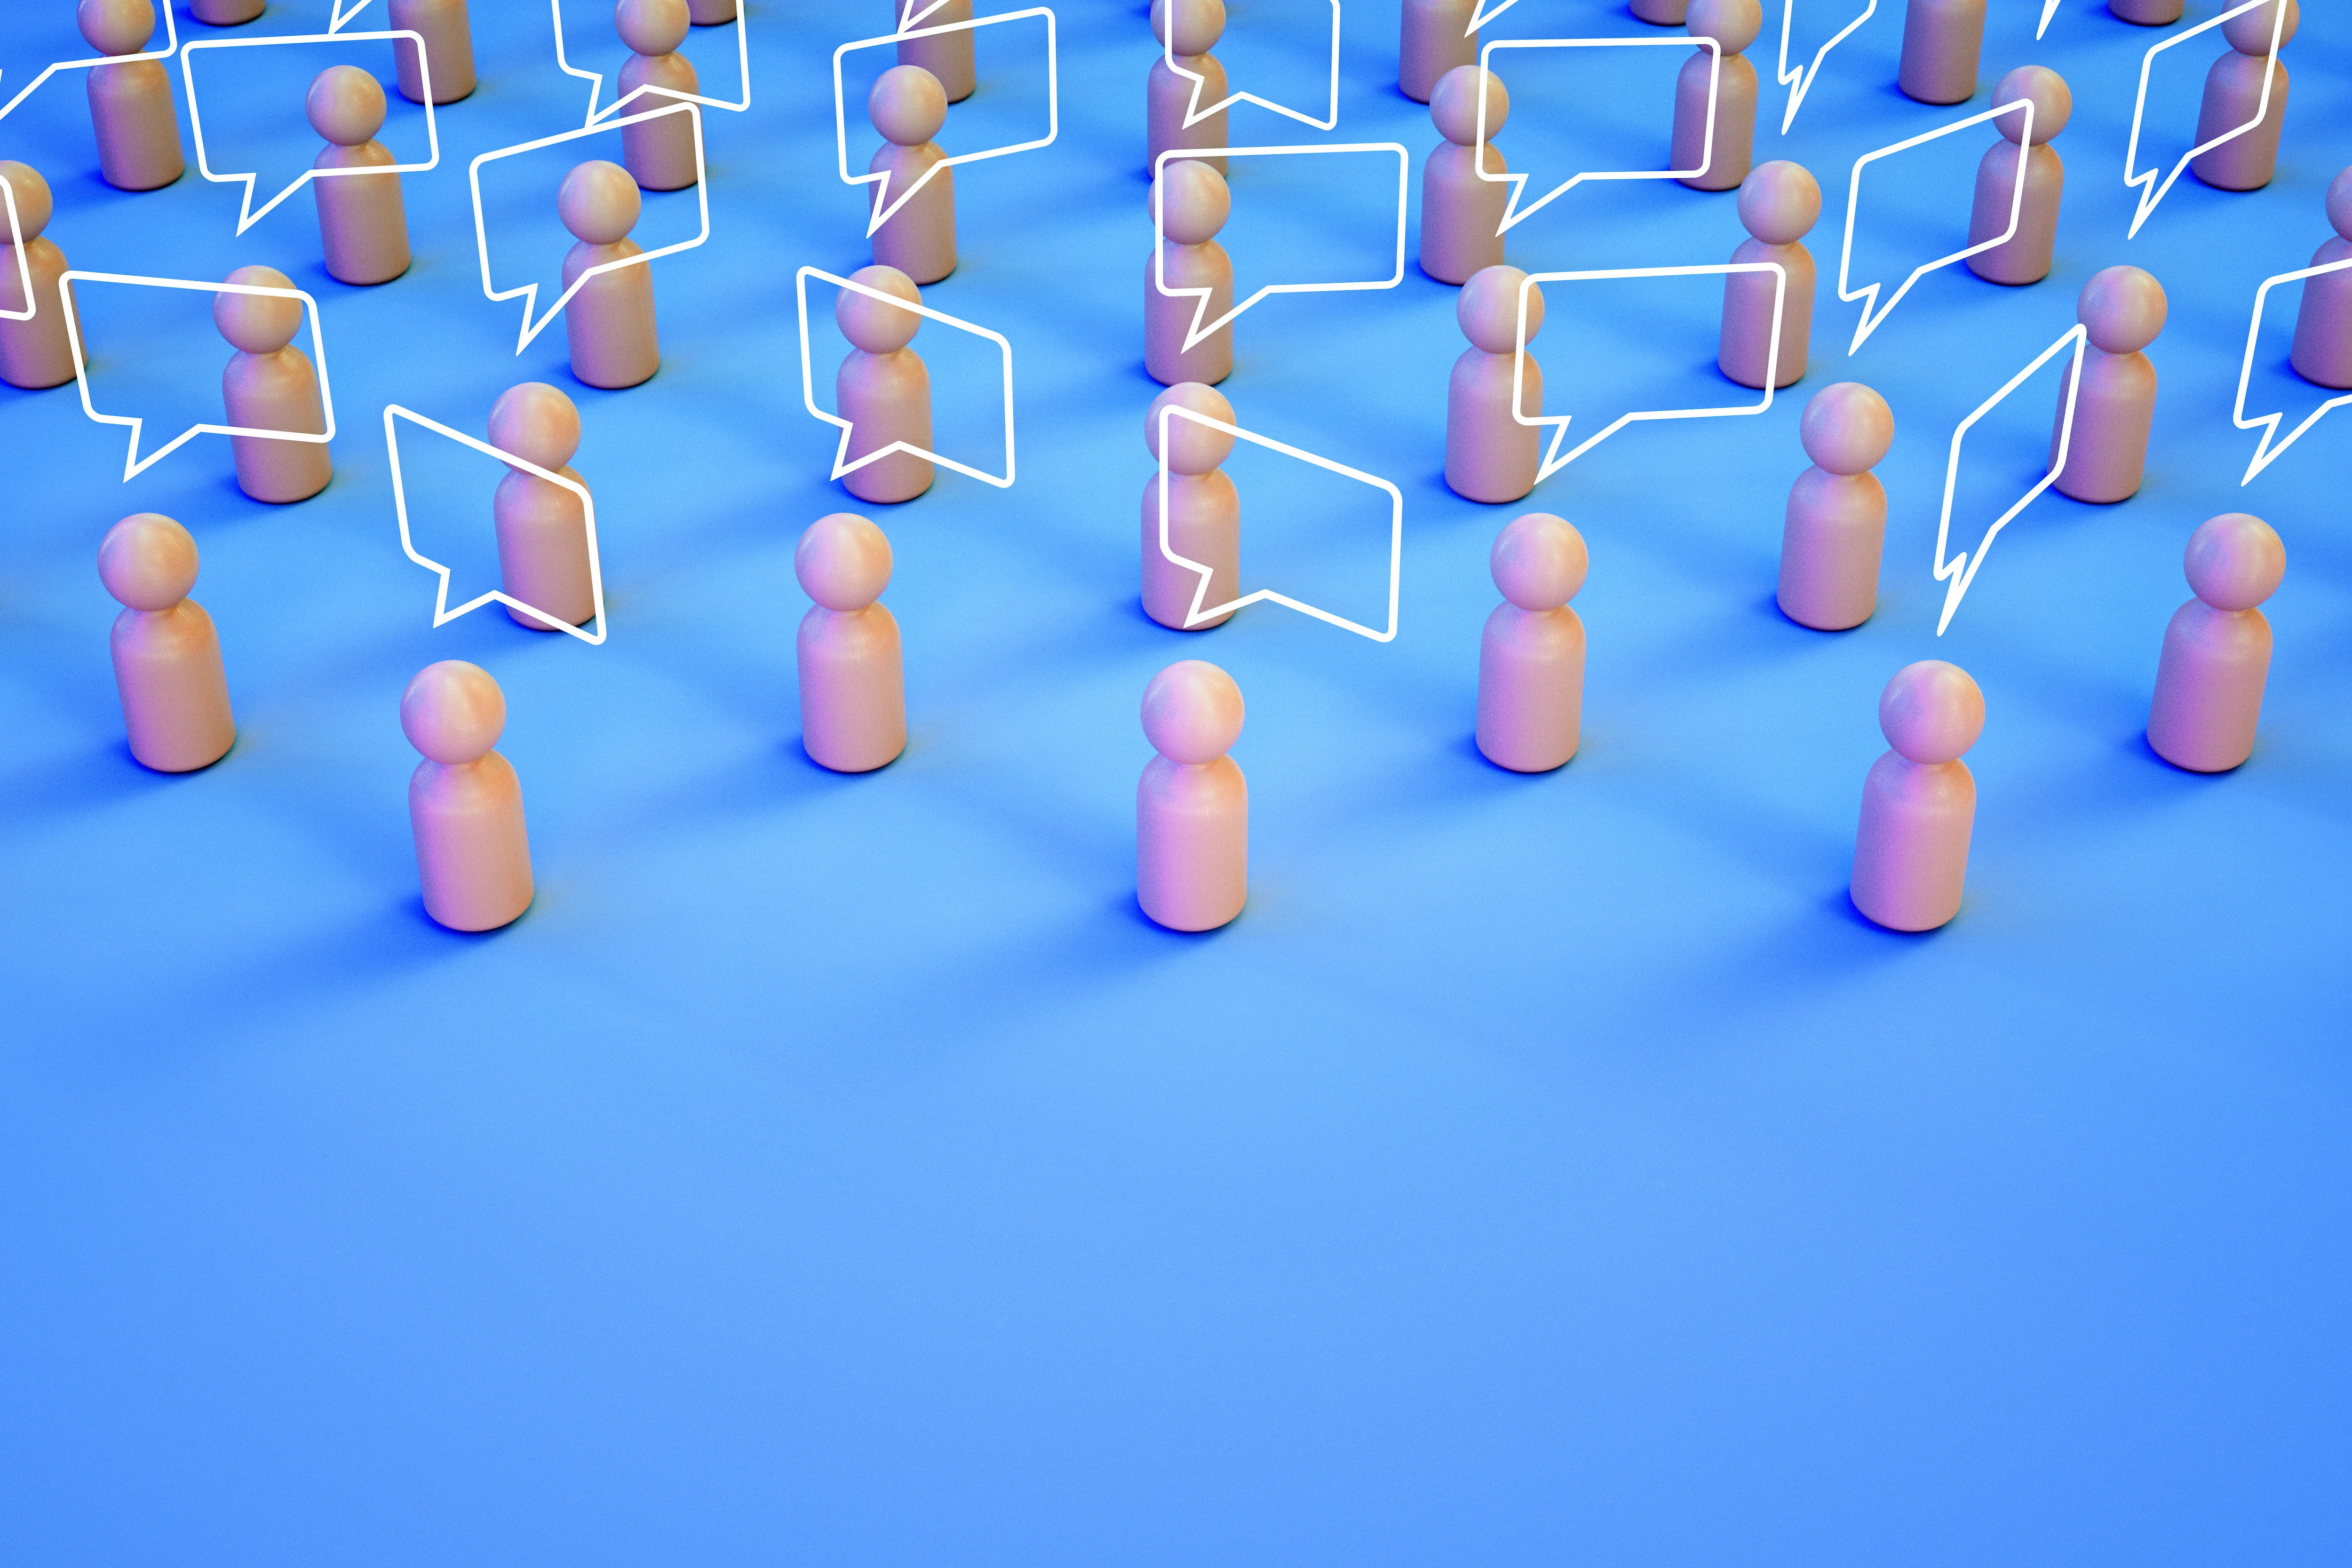 3D-rendering of teamwork and brainstorming, including speech bubbles